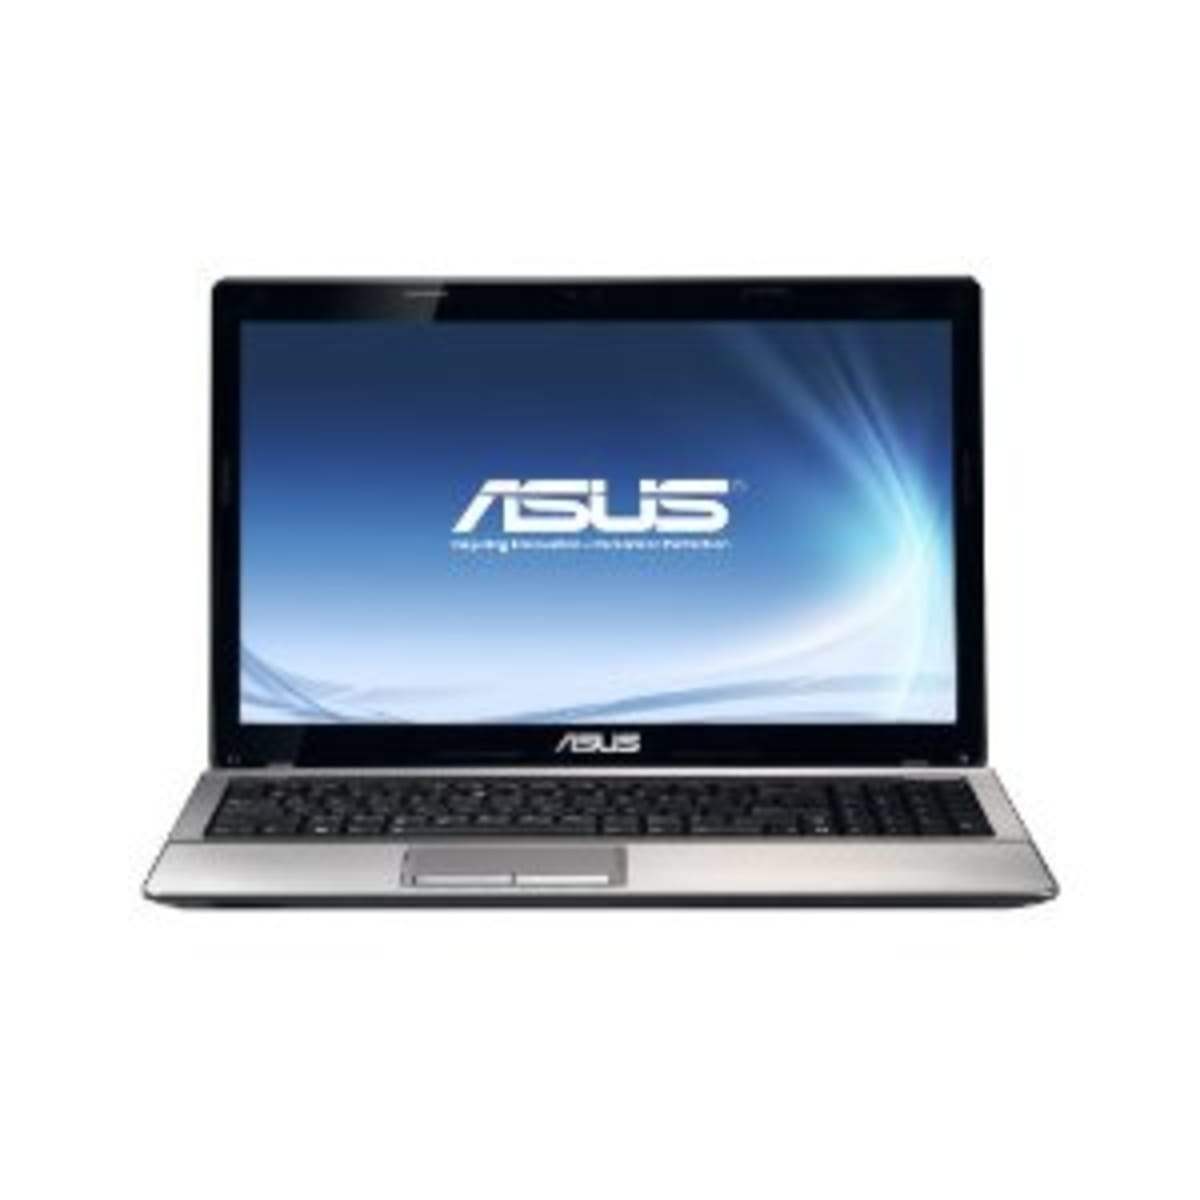 Asus A53S Drivers : Fix Can T Install Asus Smart Gesture ...